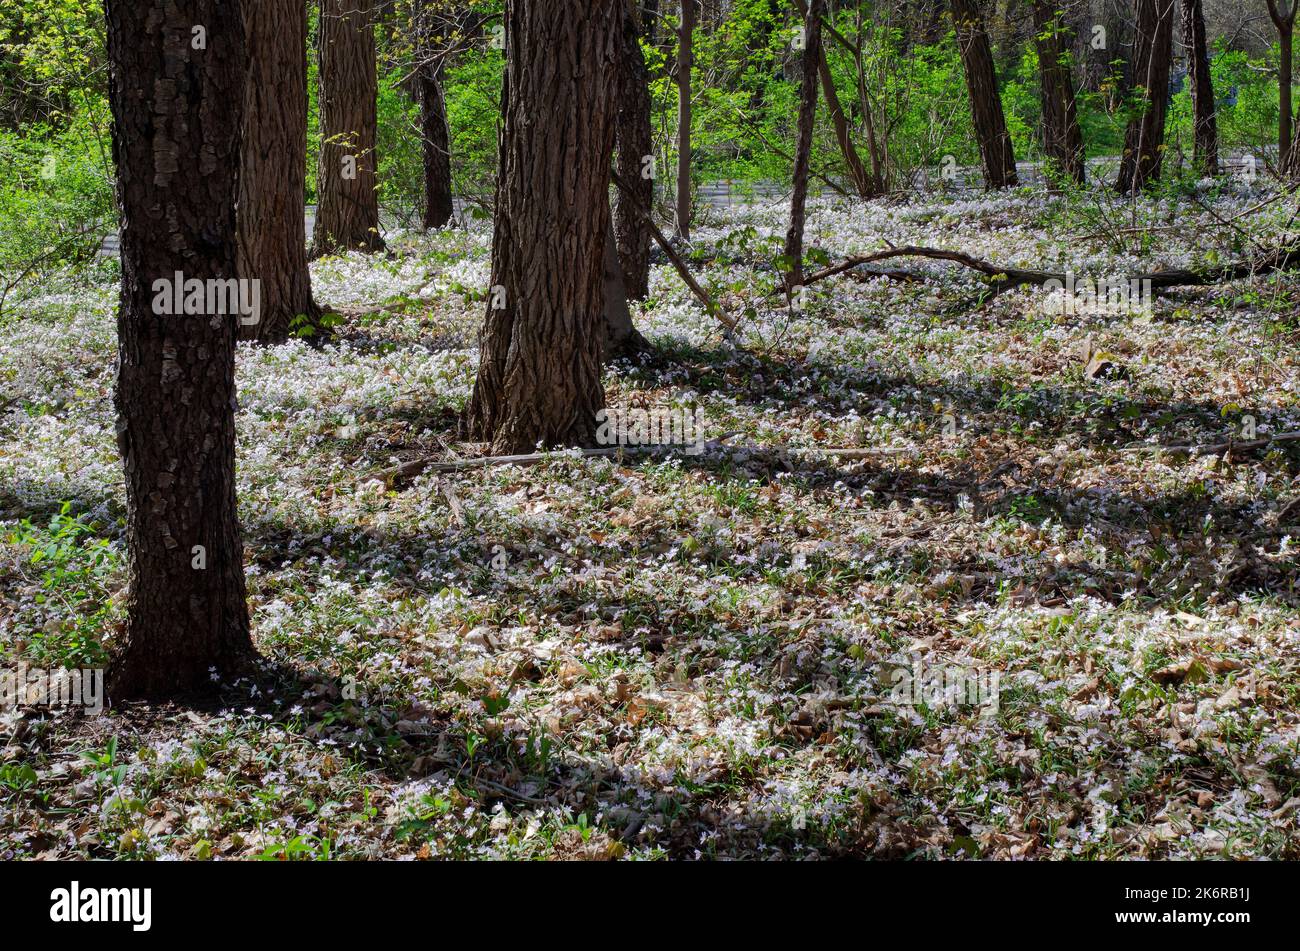 Spring Beauty Teppiche im Waldboden im Fort Custer State Recreation Area in Kalamazoo County, Michigan Stockfoto